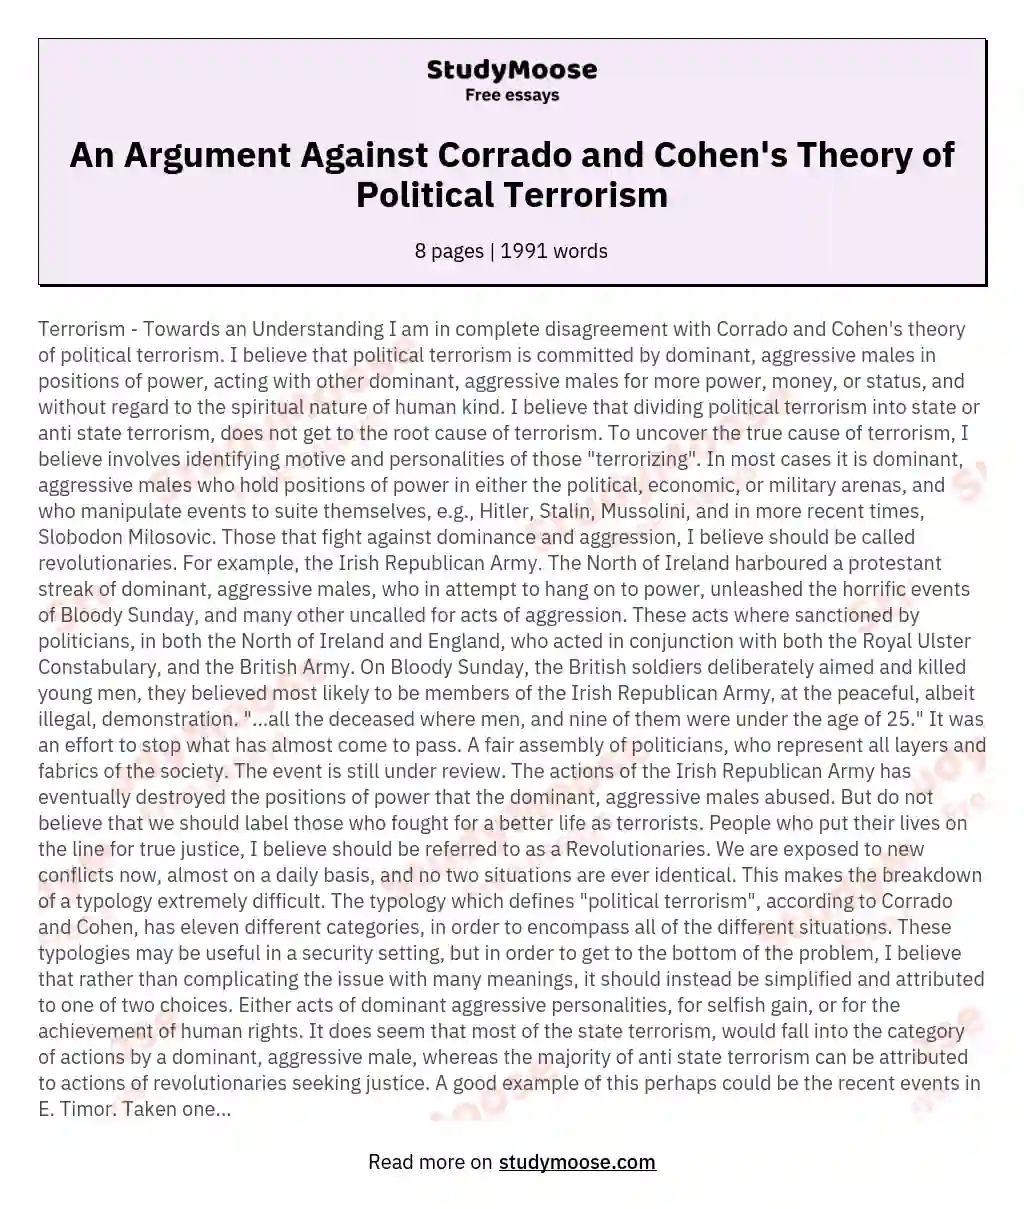 An Argument Against Corrado and Cohen's Theory of Political Terrorism